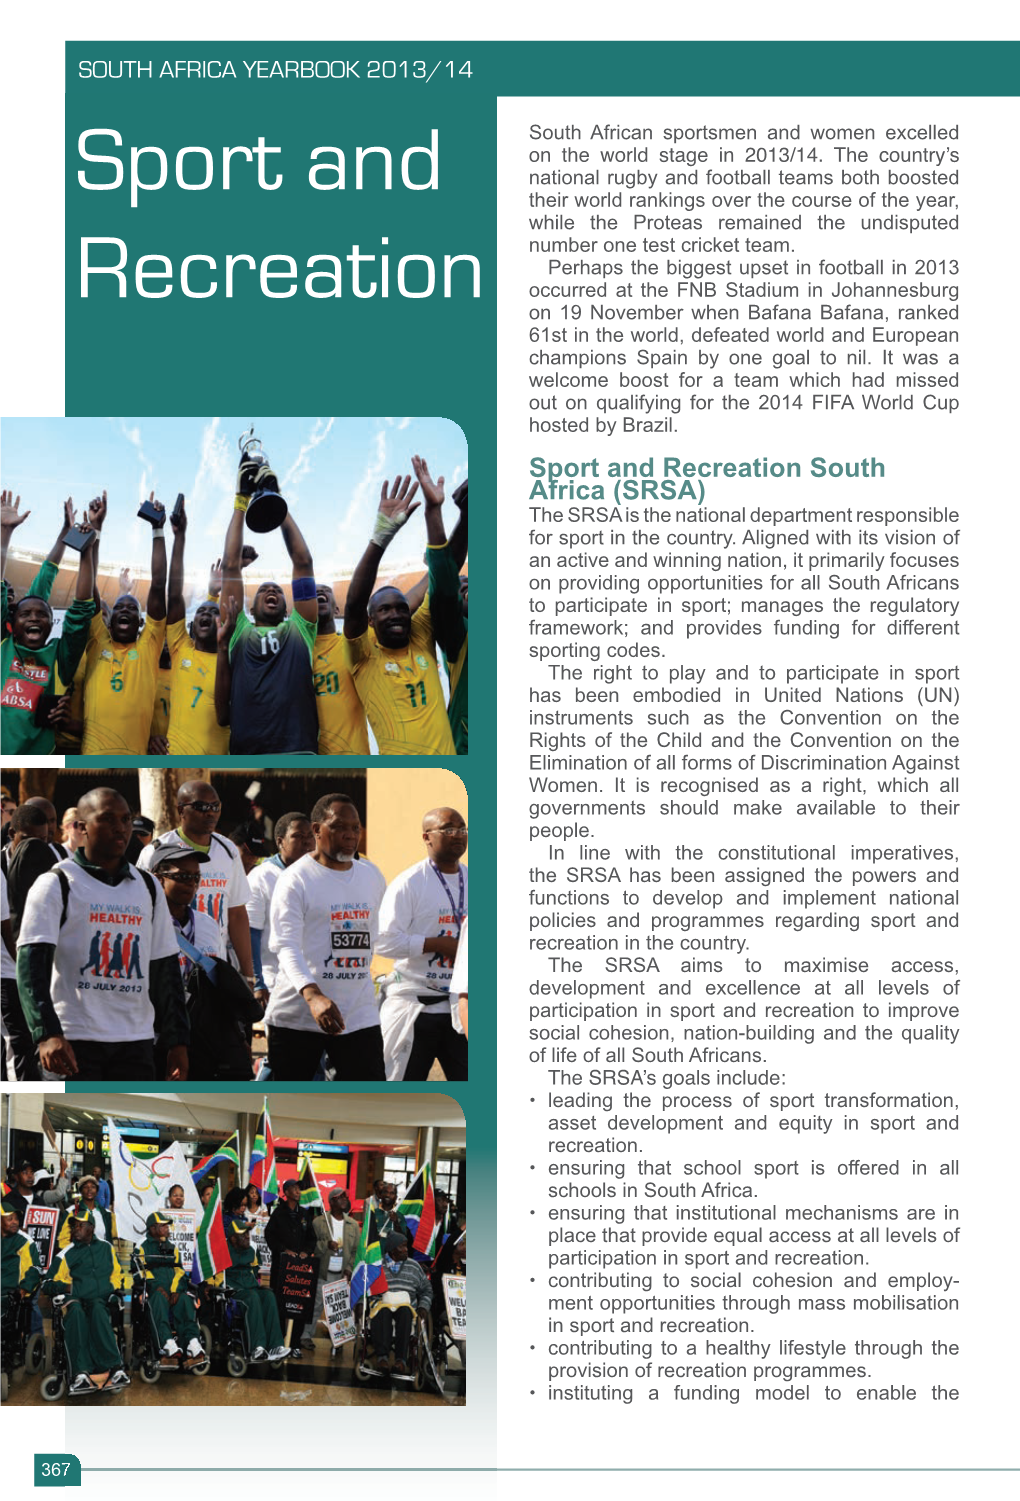 South Africa Yearbook 2013/2014 Sport and Recreation